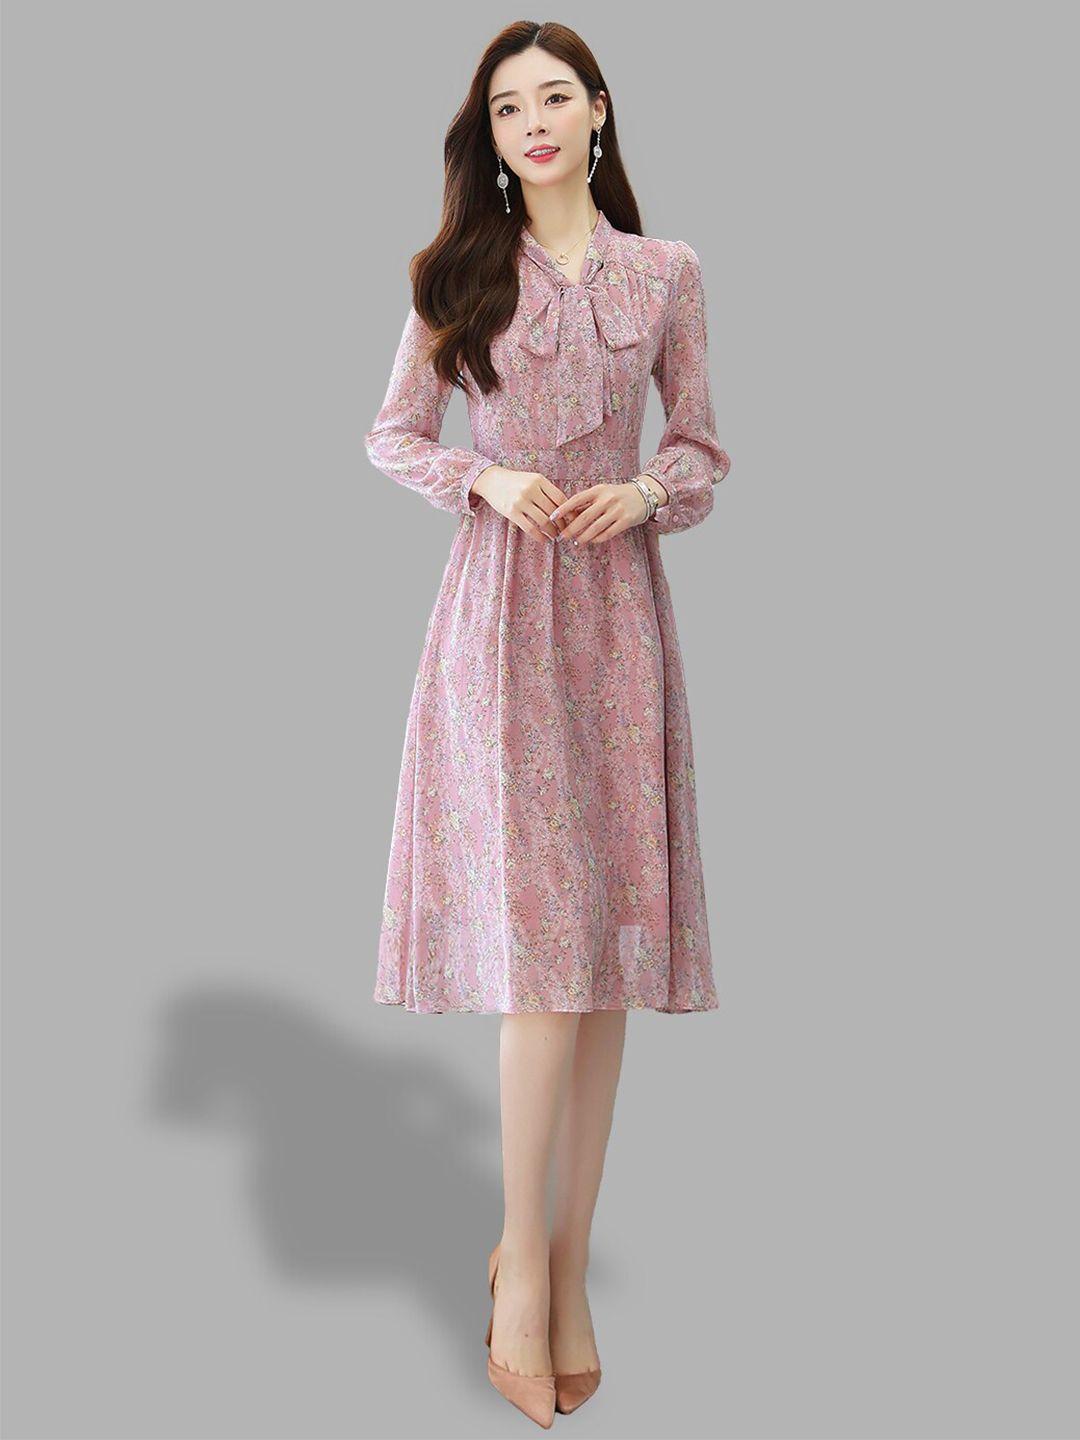 jc-collection-pink-&-white-floral-tie-up-neck-fit-&-flare-dress